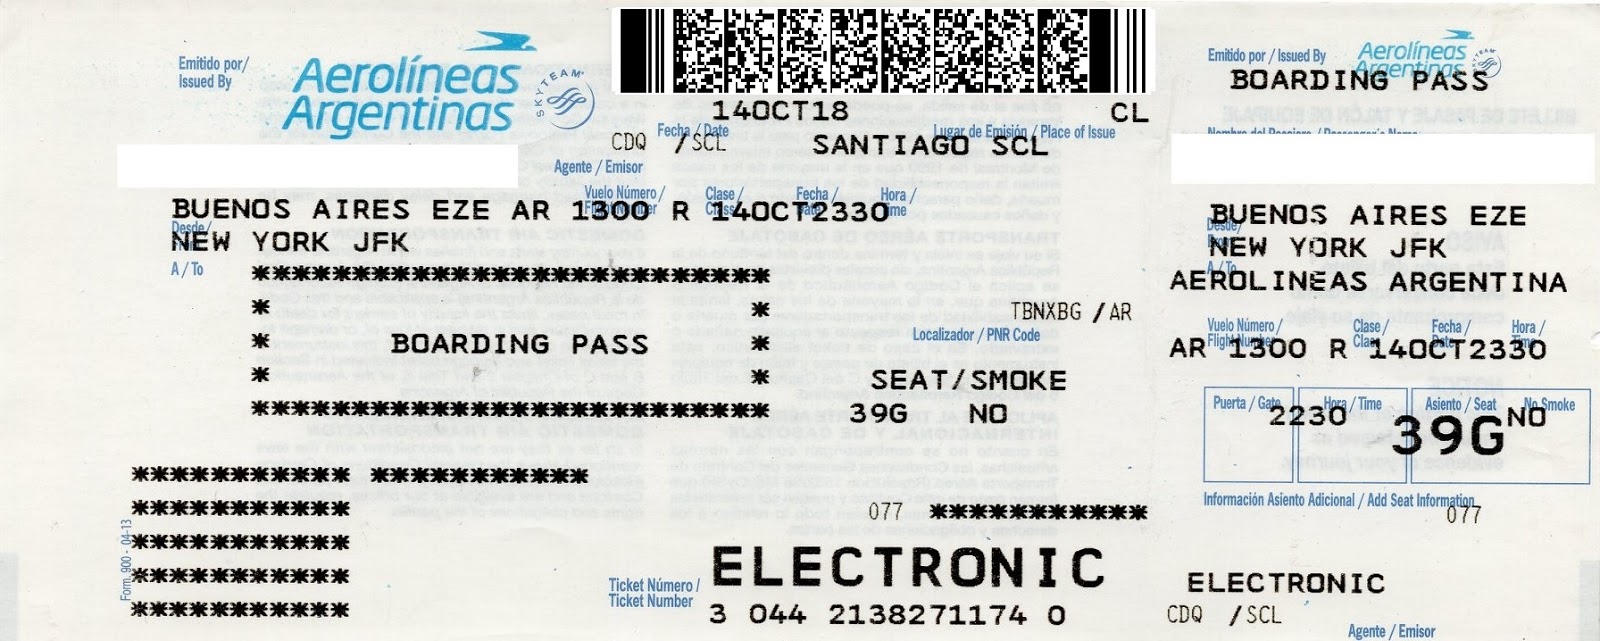 The Traveler S Drawer AerolÍneas Argentinas Boarding Pass For The Flight Ar 1300 From Buenos